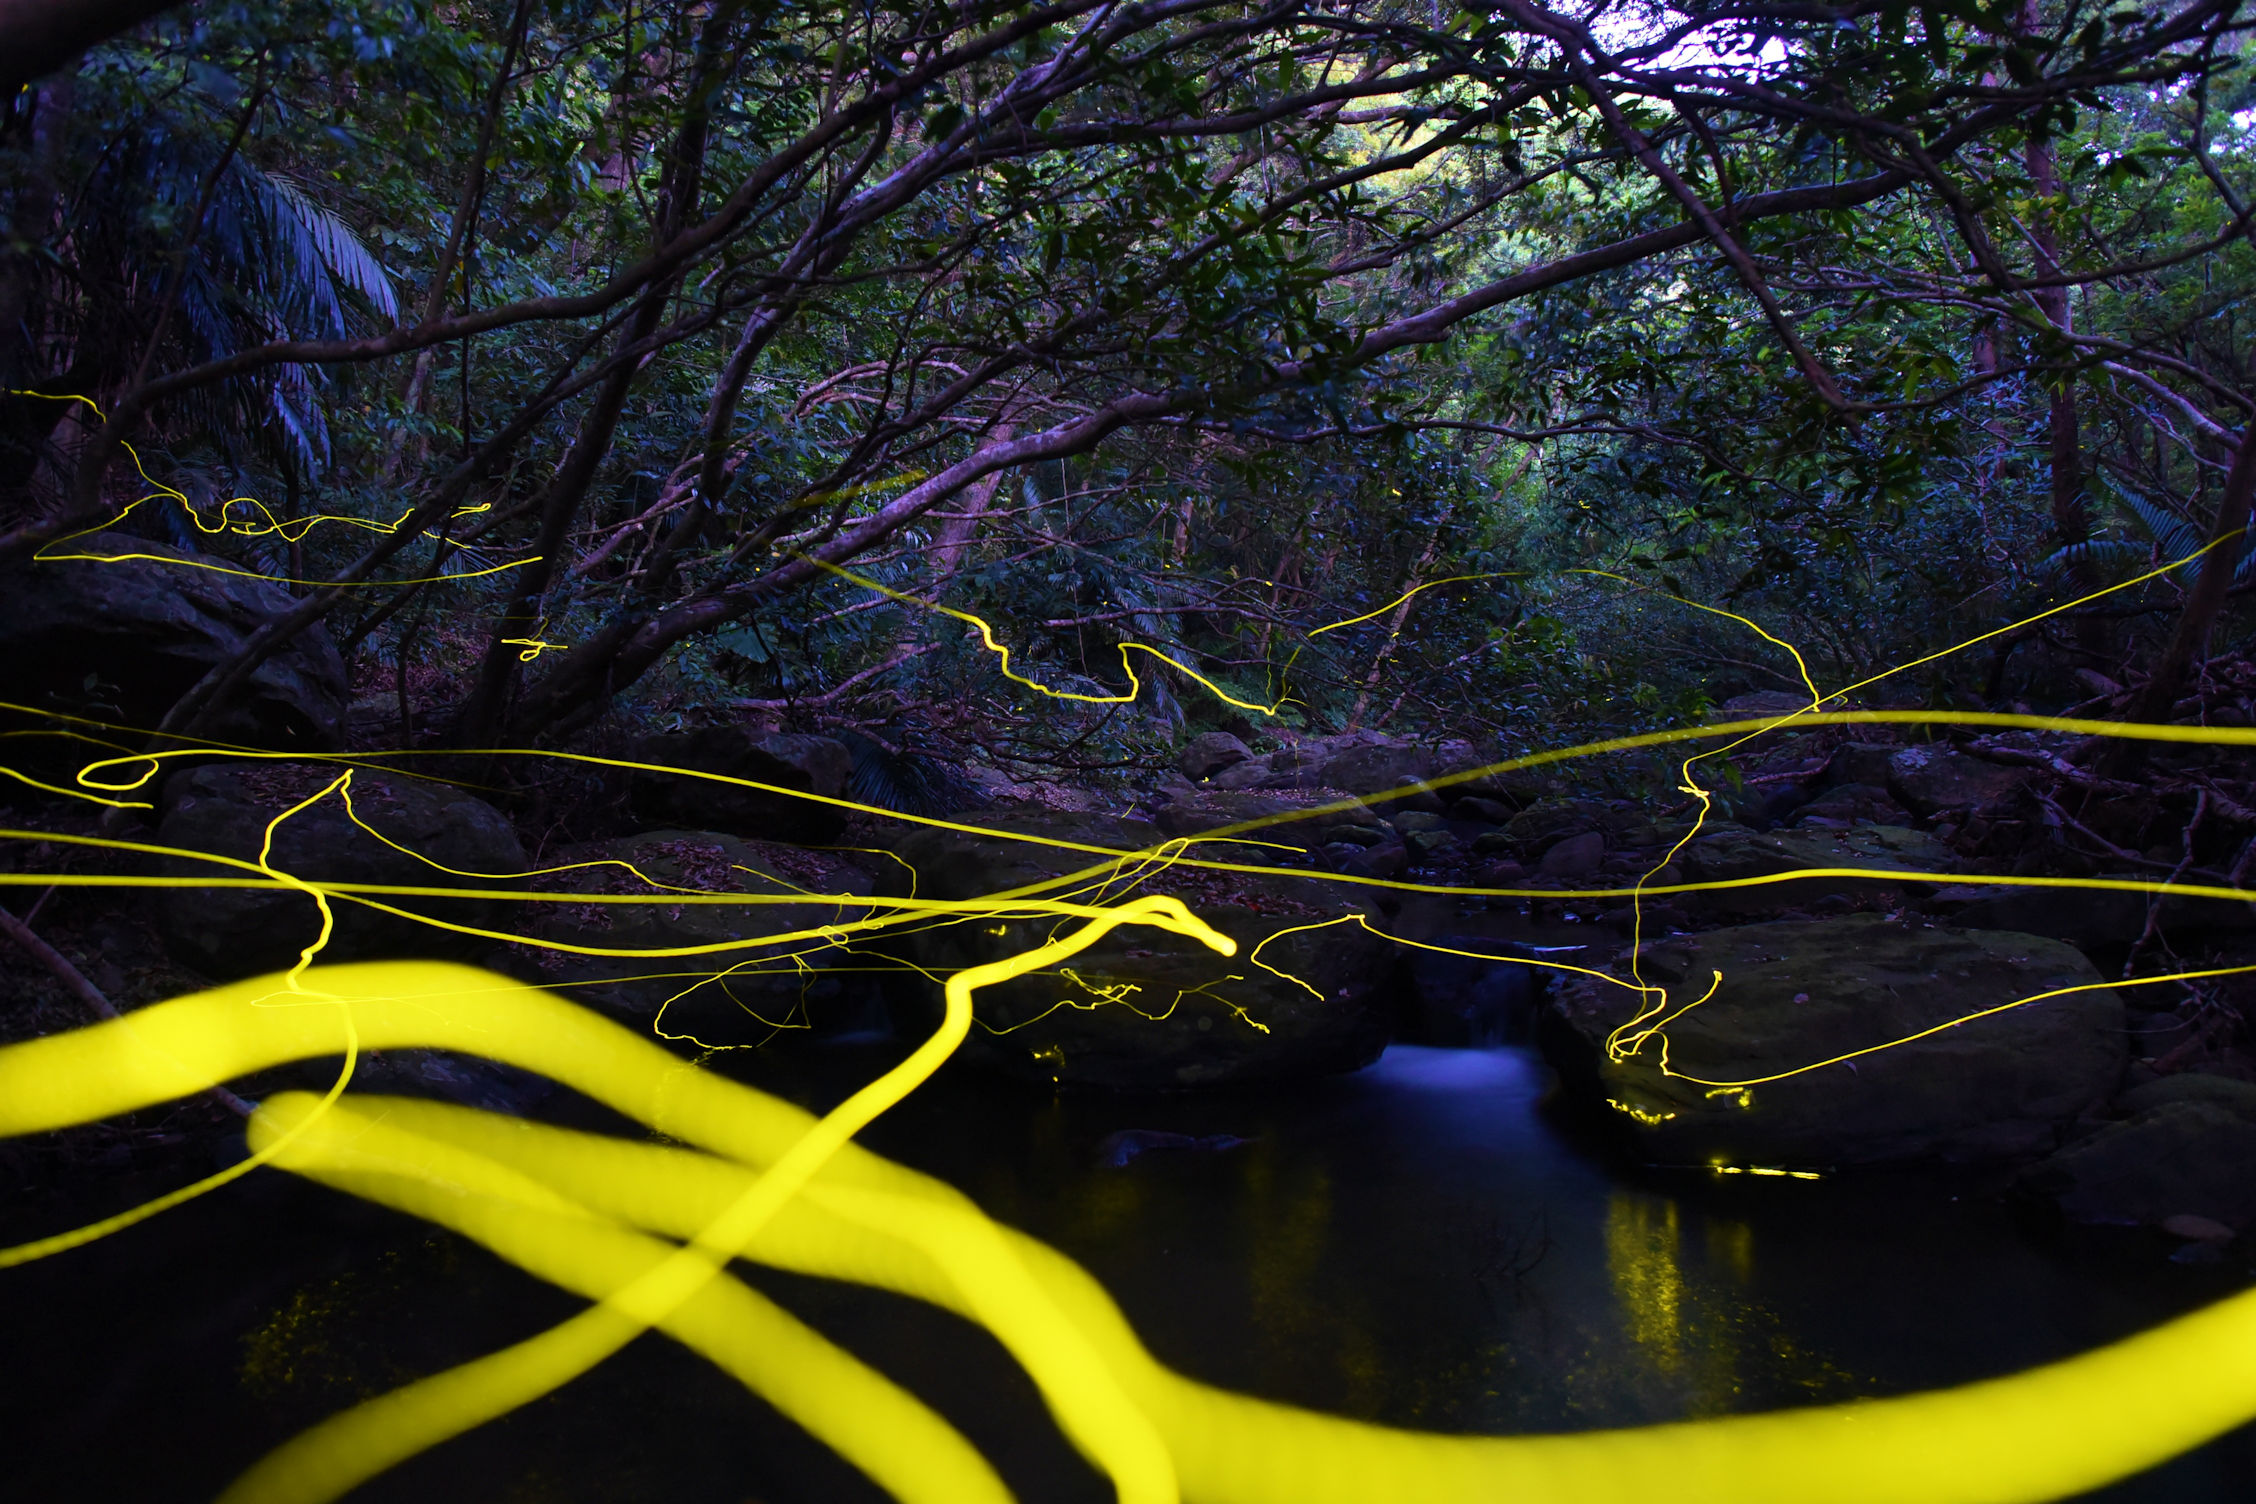 A photograph of Kumejima firefly in a forest, leaving bright yellow streaks across the image.